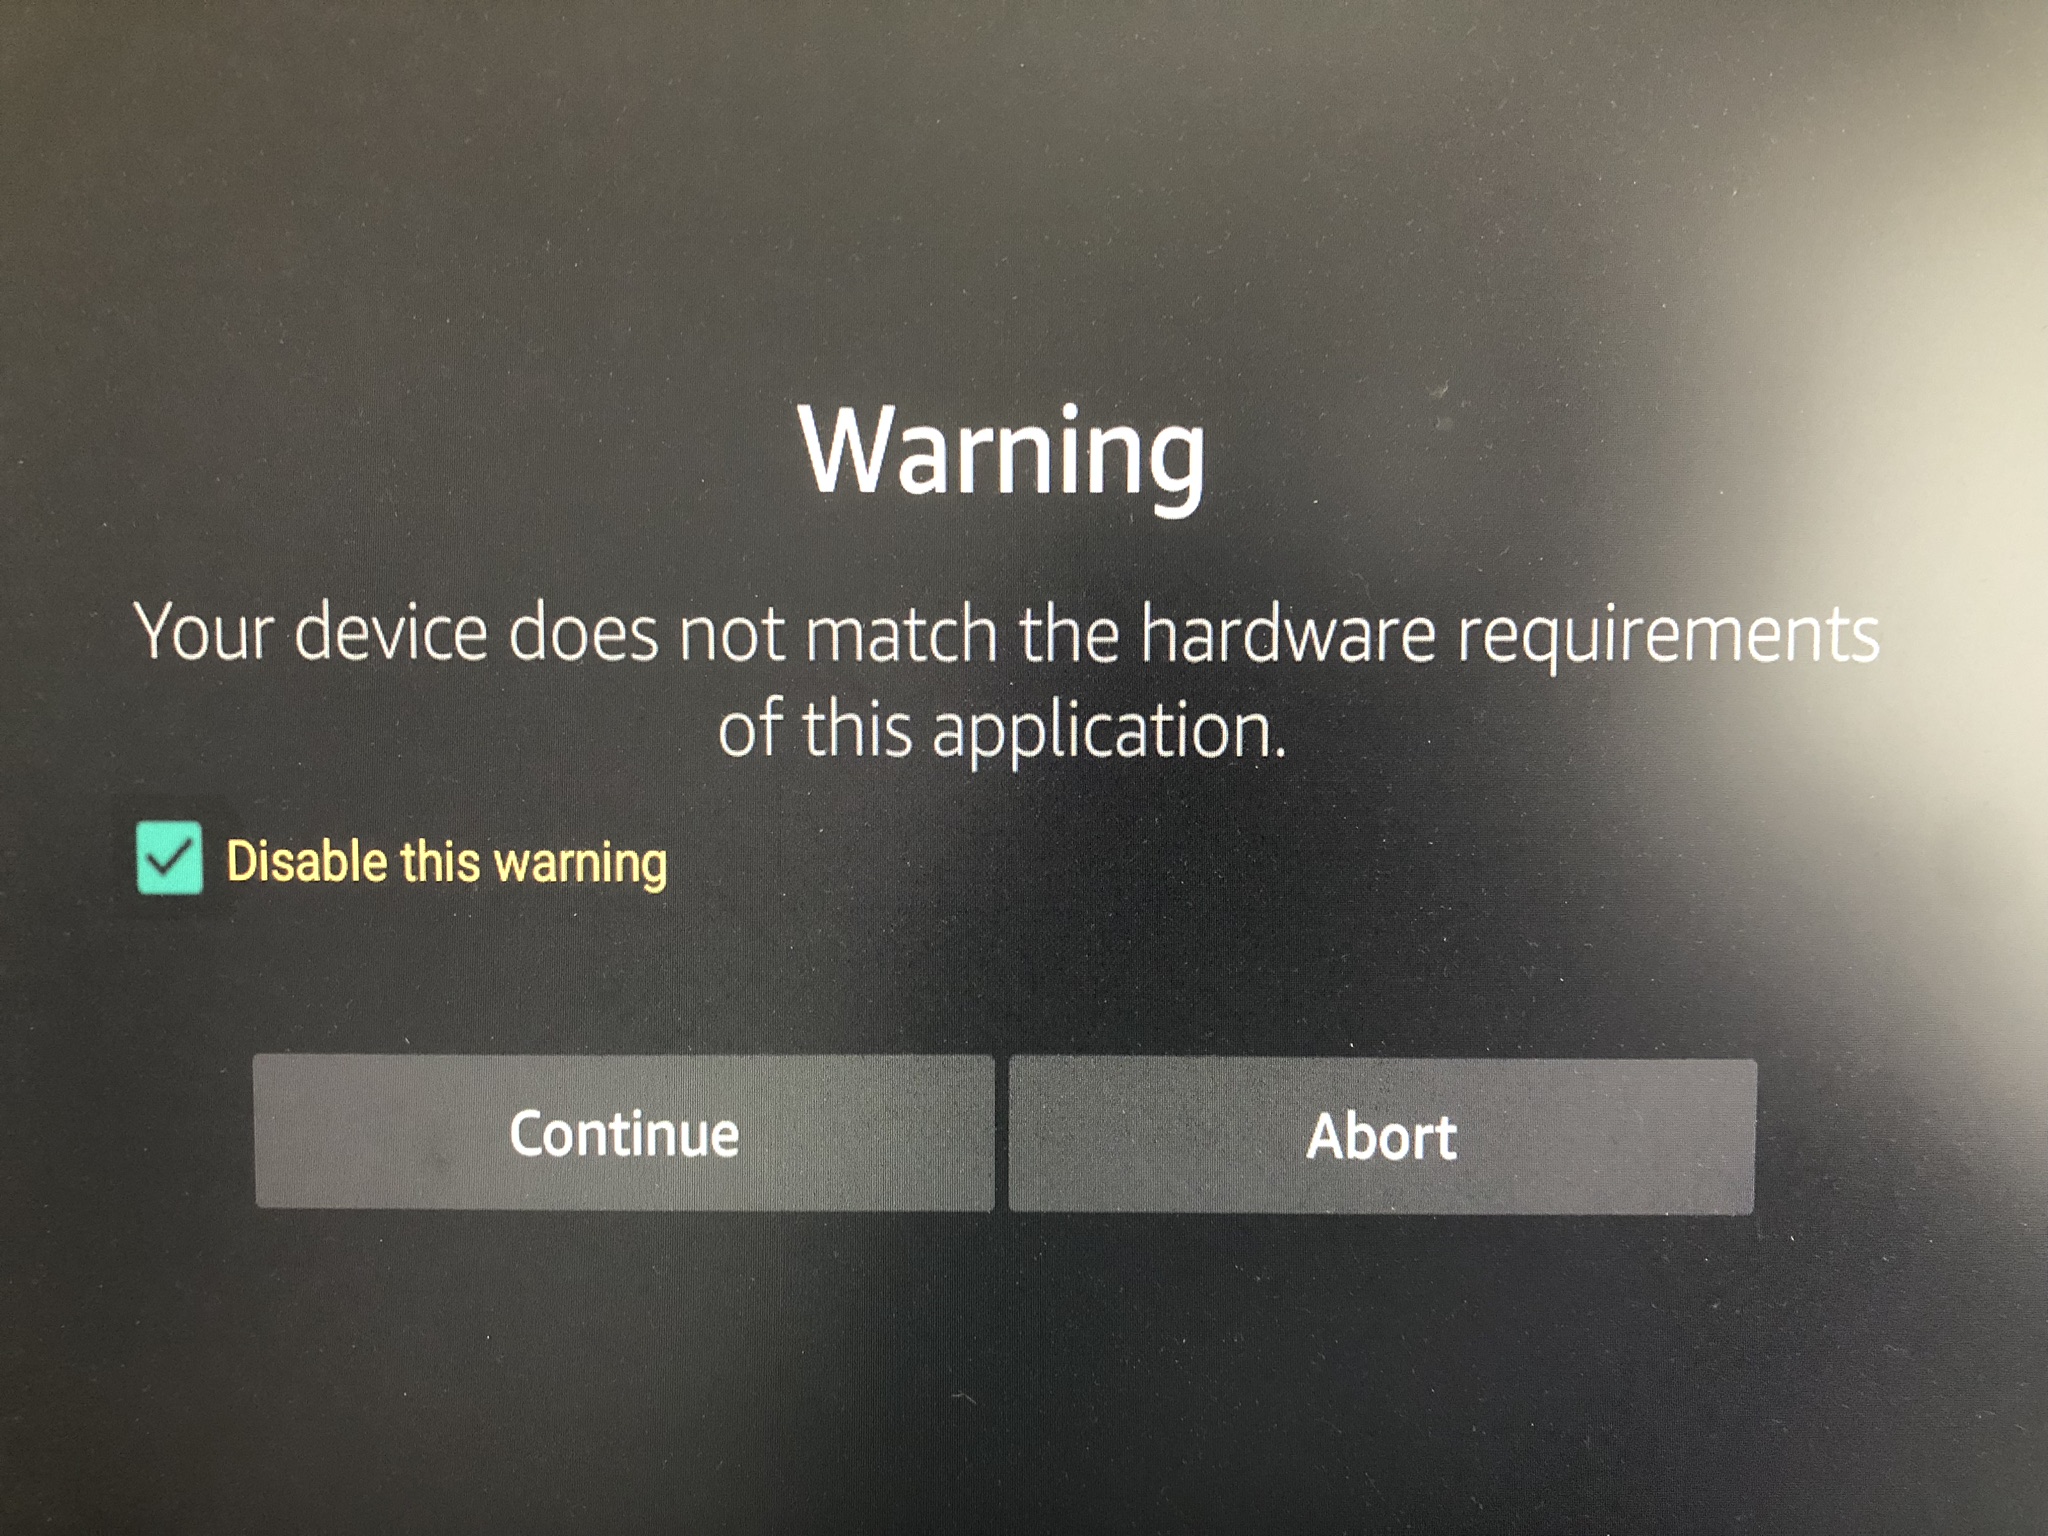 Fire TV Unity Warning Dialog - Your device does not match the hardware requirements of this application